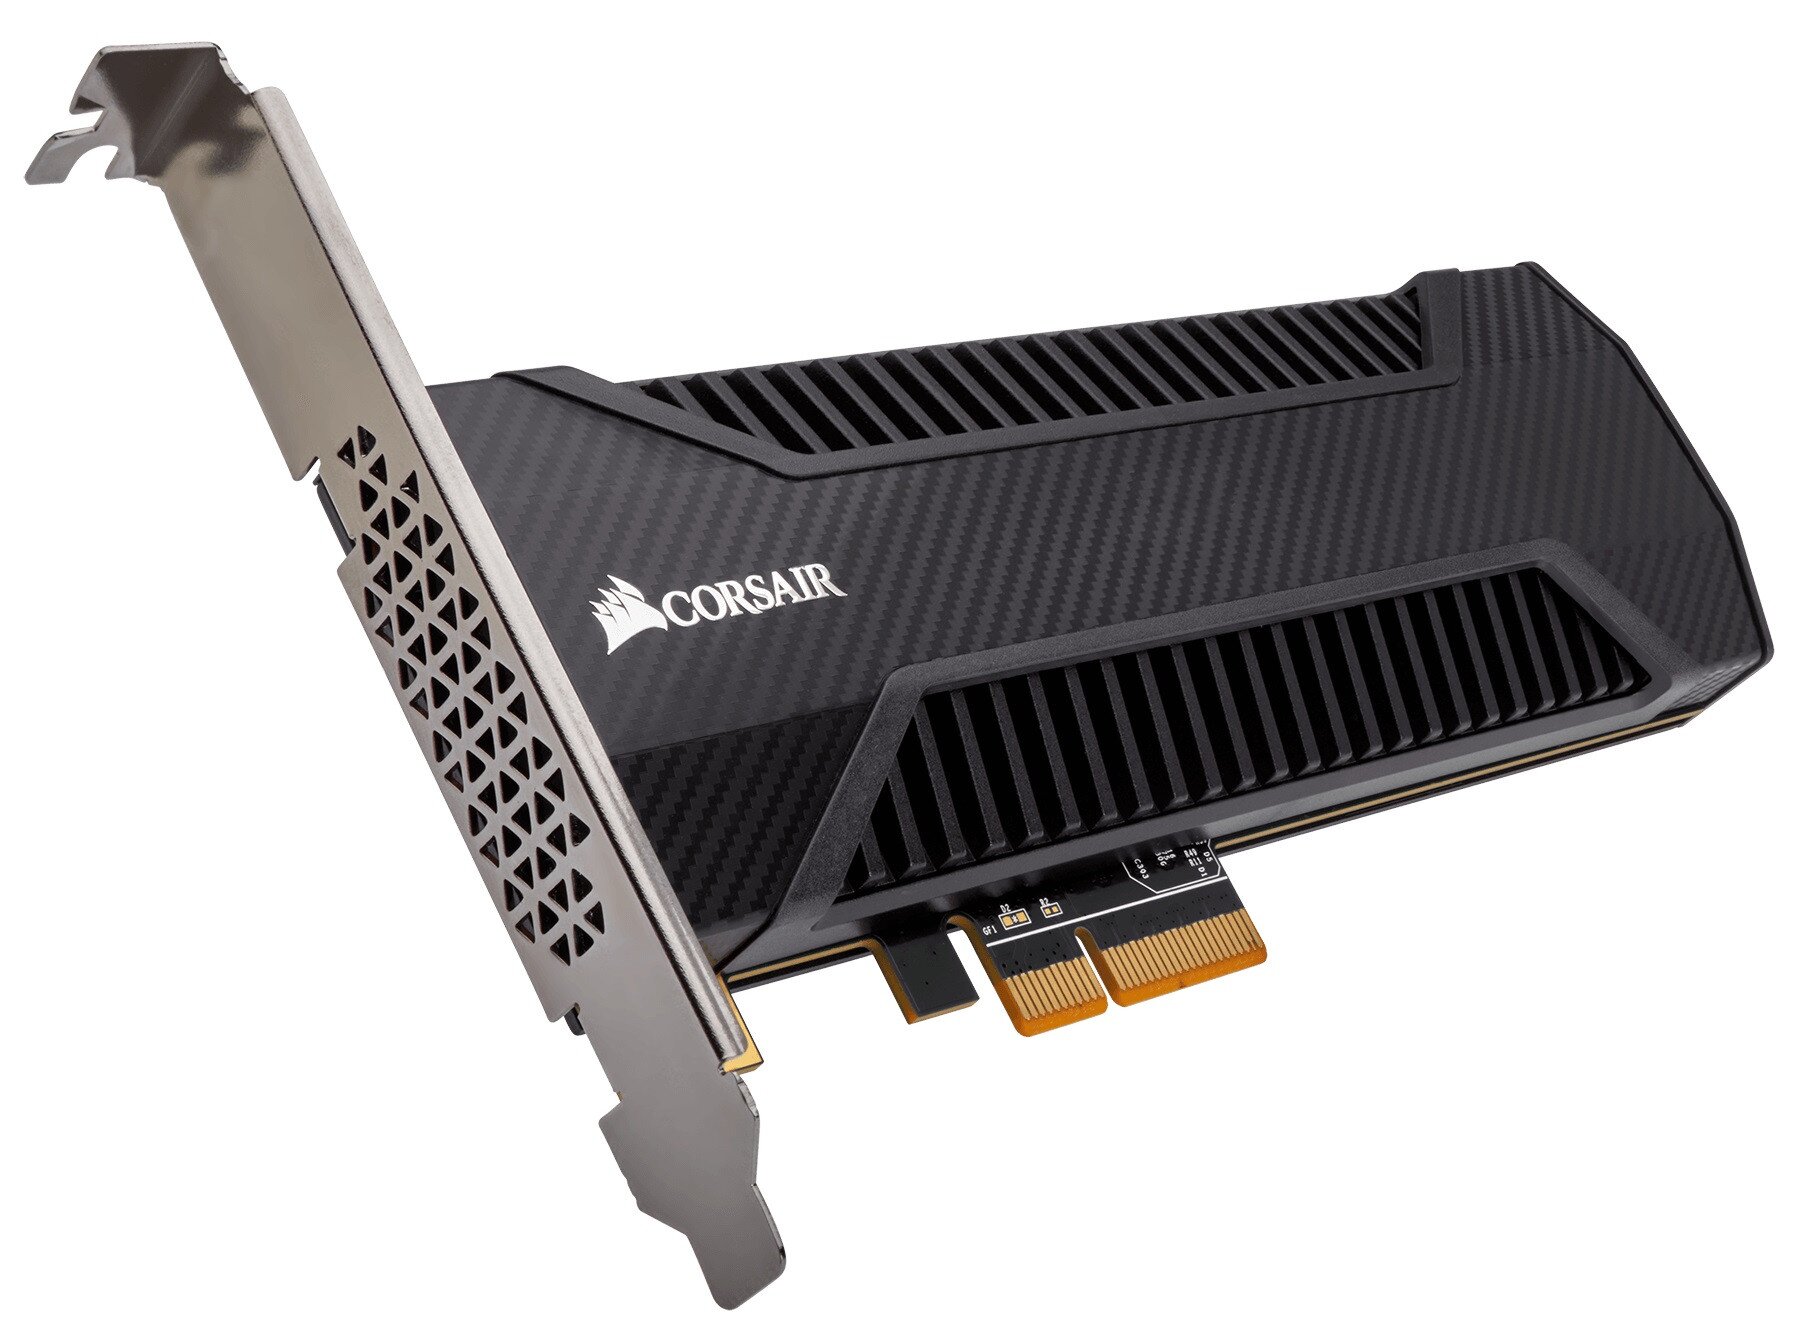 Best NVMe PCIe SSD Add-in Cards to Buy in 2021 - Appuals.com